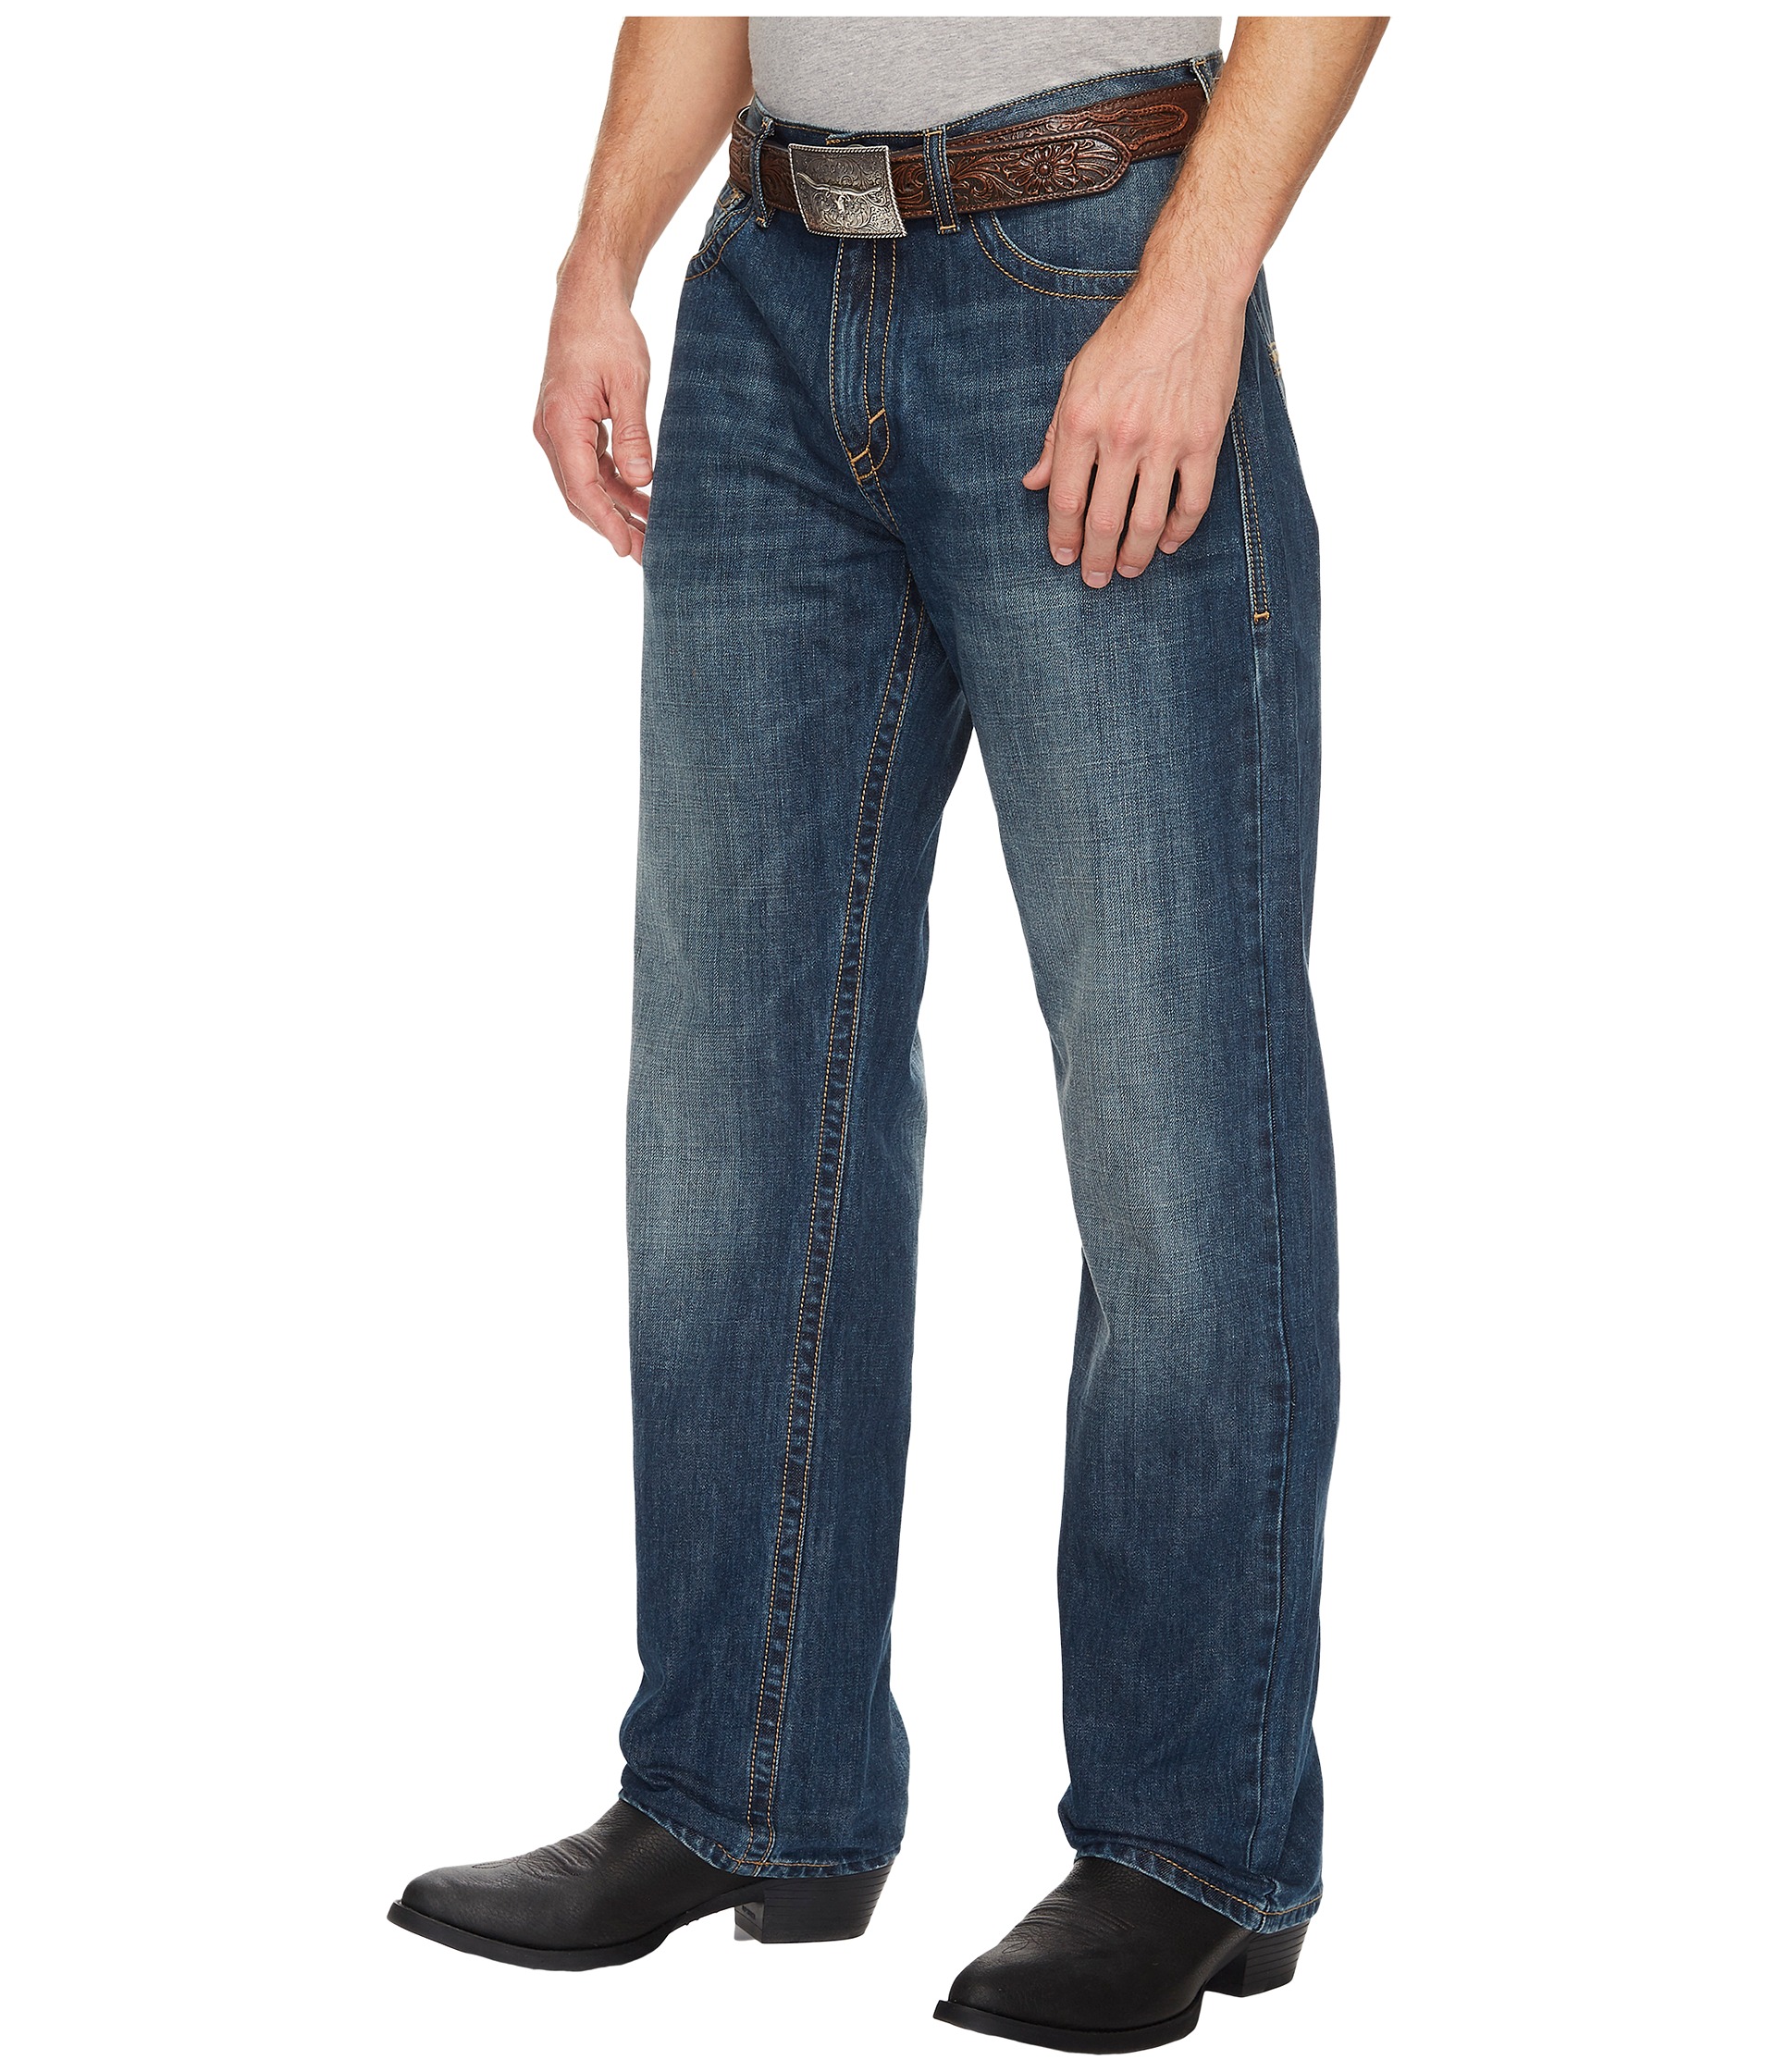 Wrangler Relaxed Fit 20X Jeans at Zappos.com